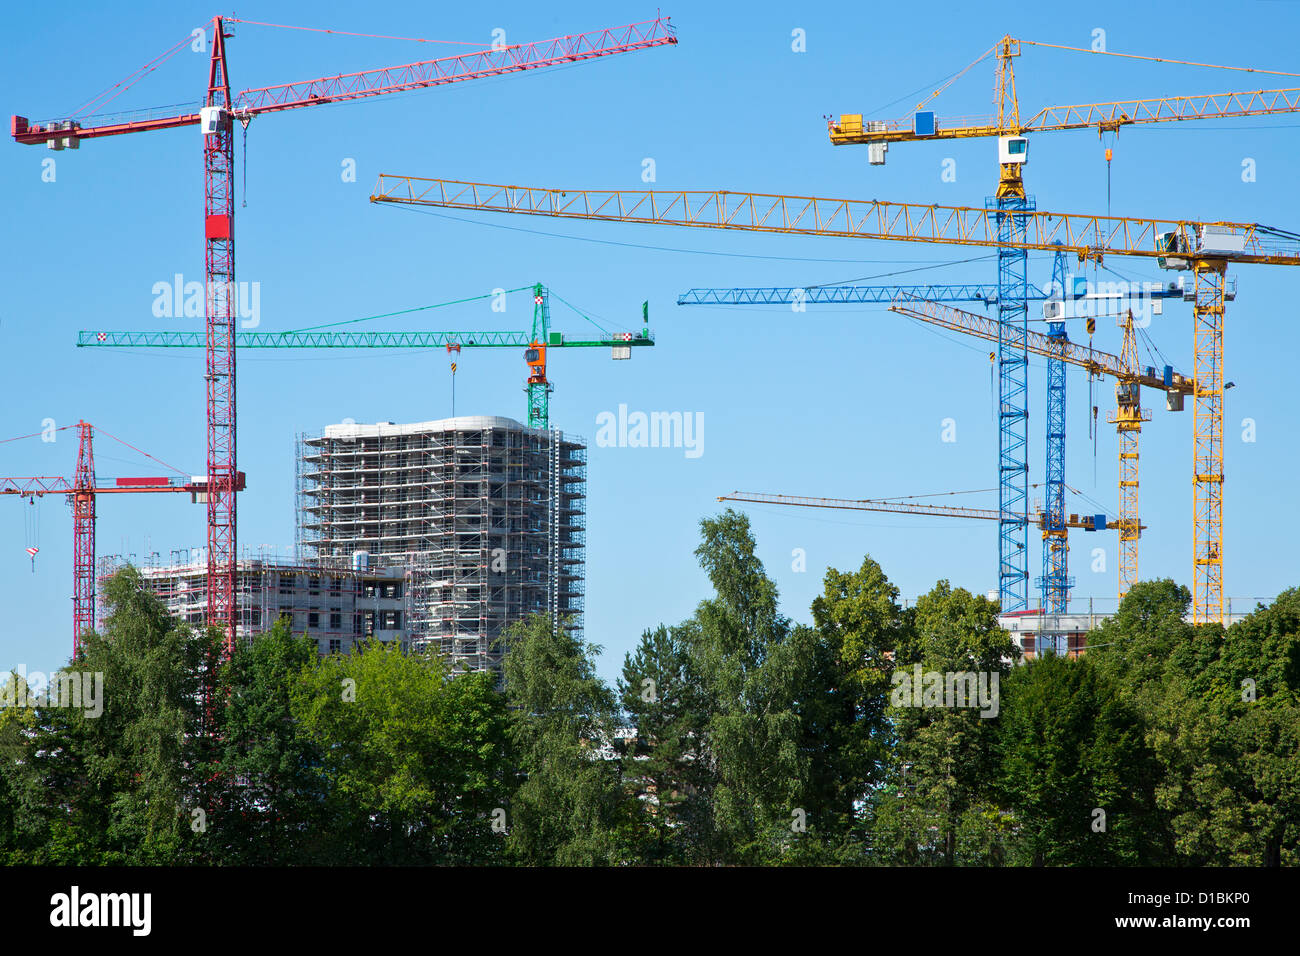 Cranes on a construction site with trees Stock Photo